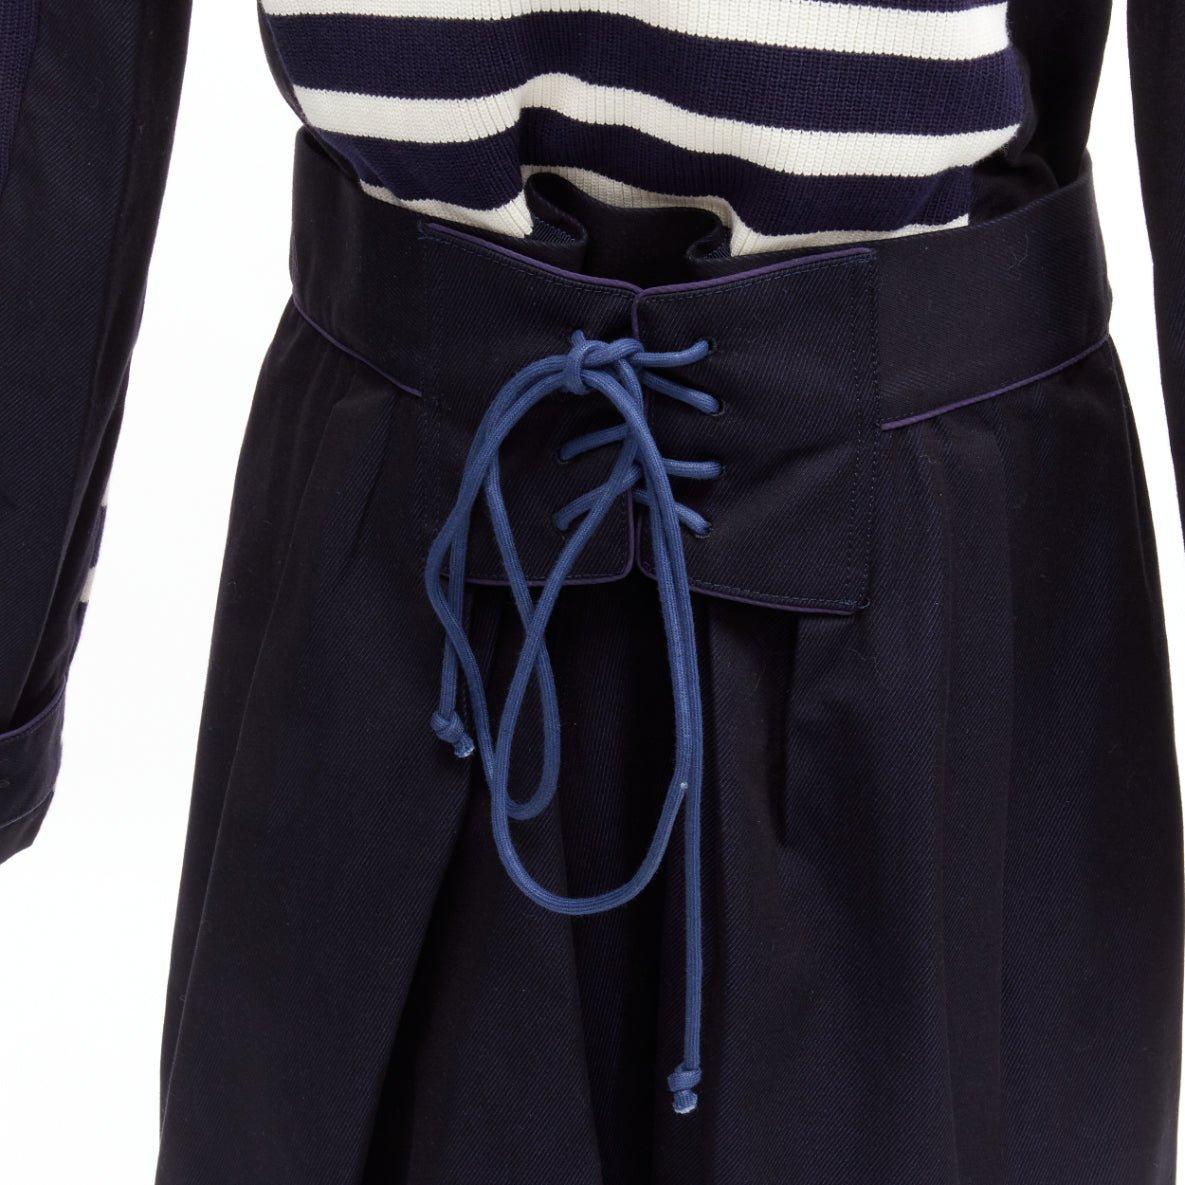 SACAI deconstructed nautical stripe detached corset belt flare coat JP3 L
Reference: CNPG/A00026
Brand: Sacai
Designer: Chitose Abe
Material: Cotton, Silk
Color: Navy, White
Pattern: Striped
Closure: Button
Lining: Blue Mesh
Extra Details: